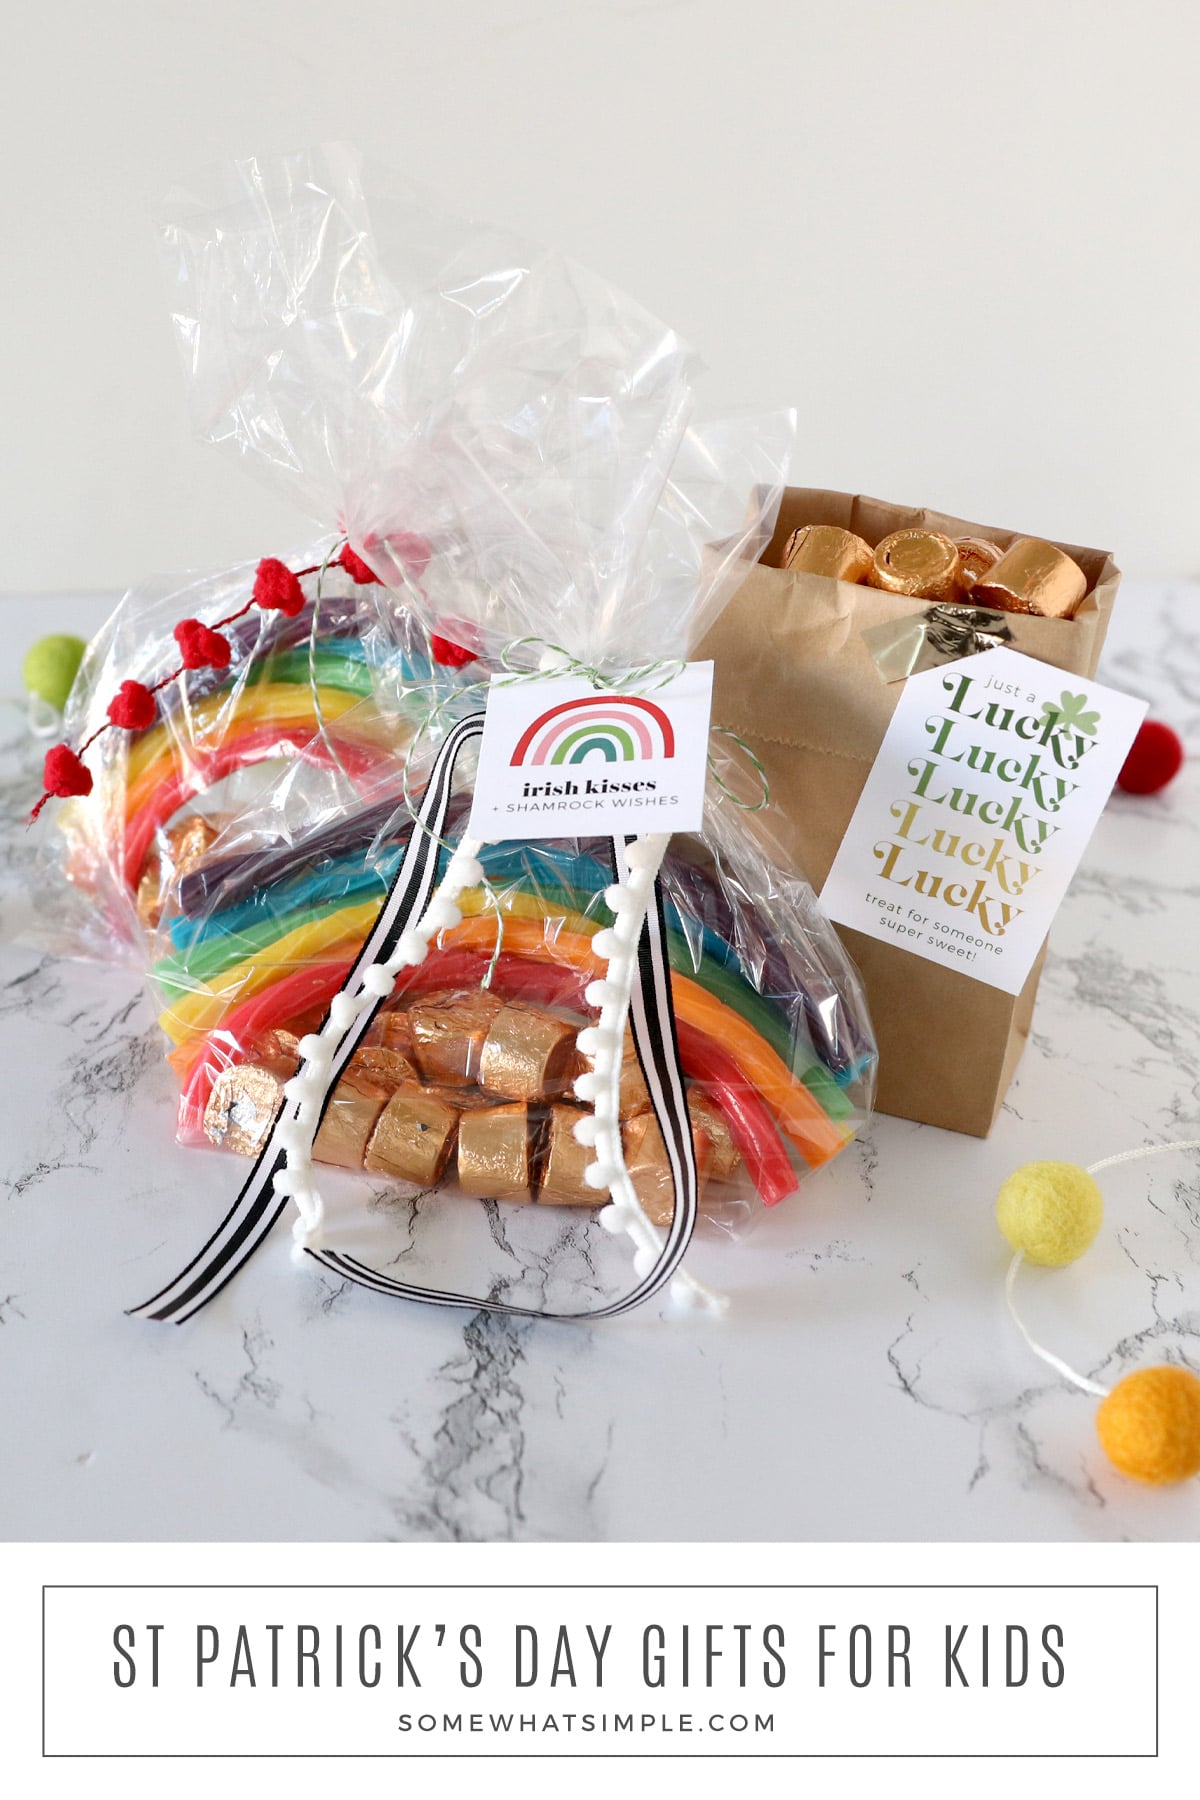 These rainbow treat bags make the cutest St Patrick's Day gifts! A fun and festive treat your kids will LOVE!!! via @somewhatsimple